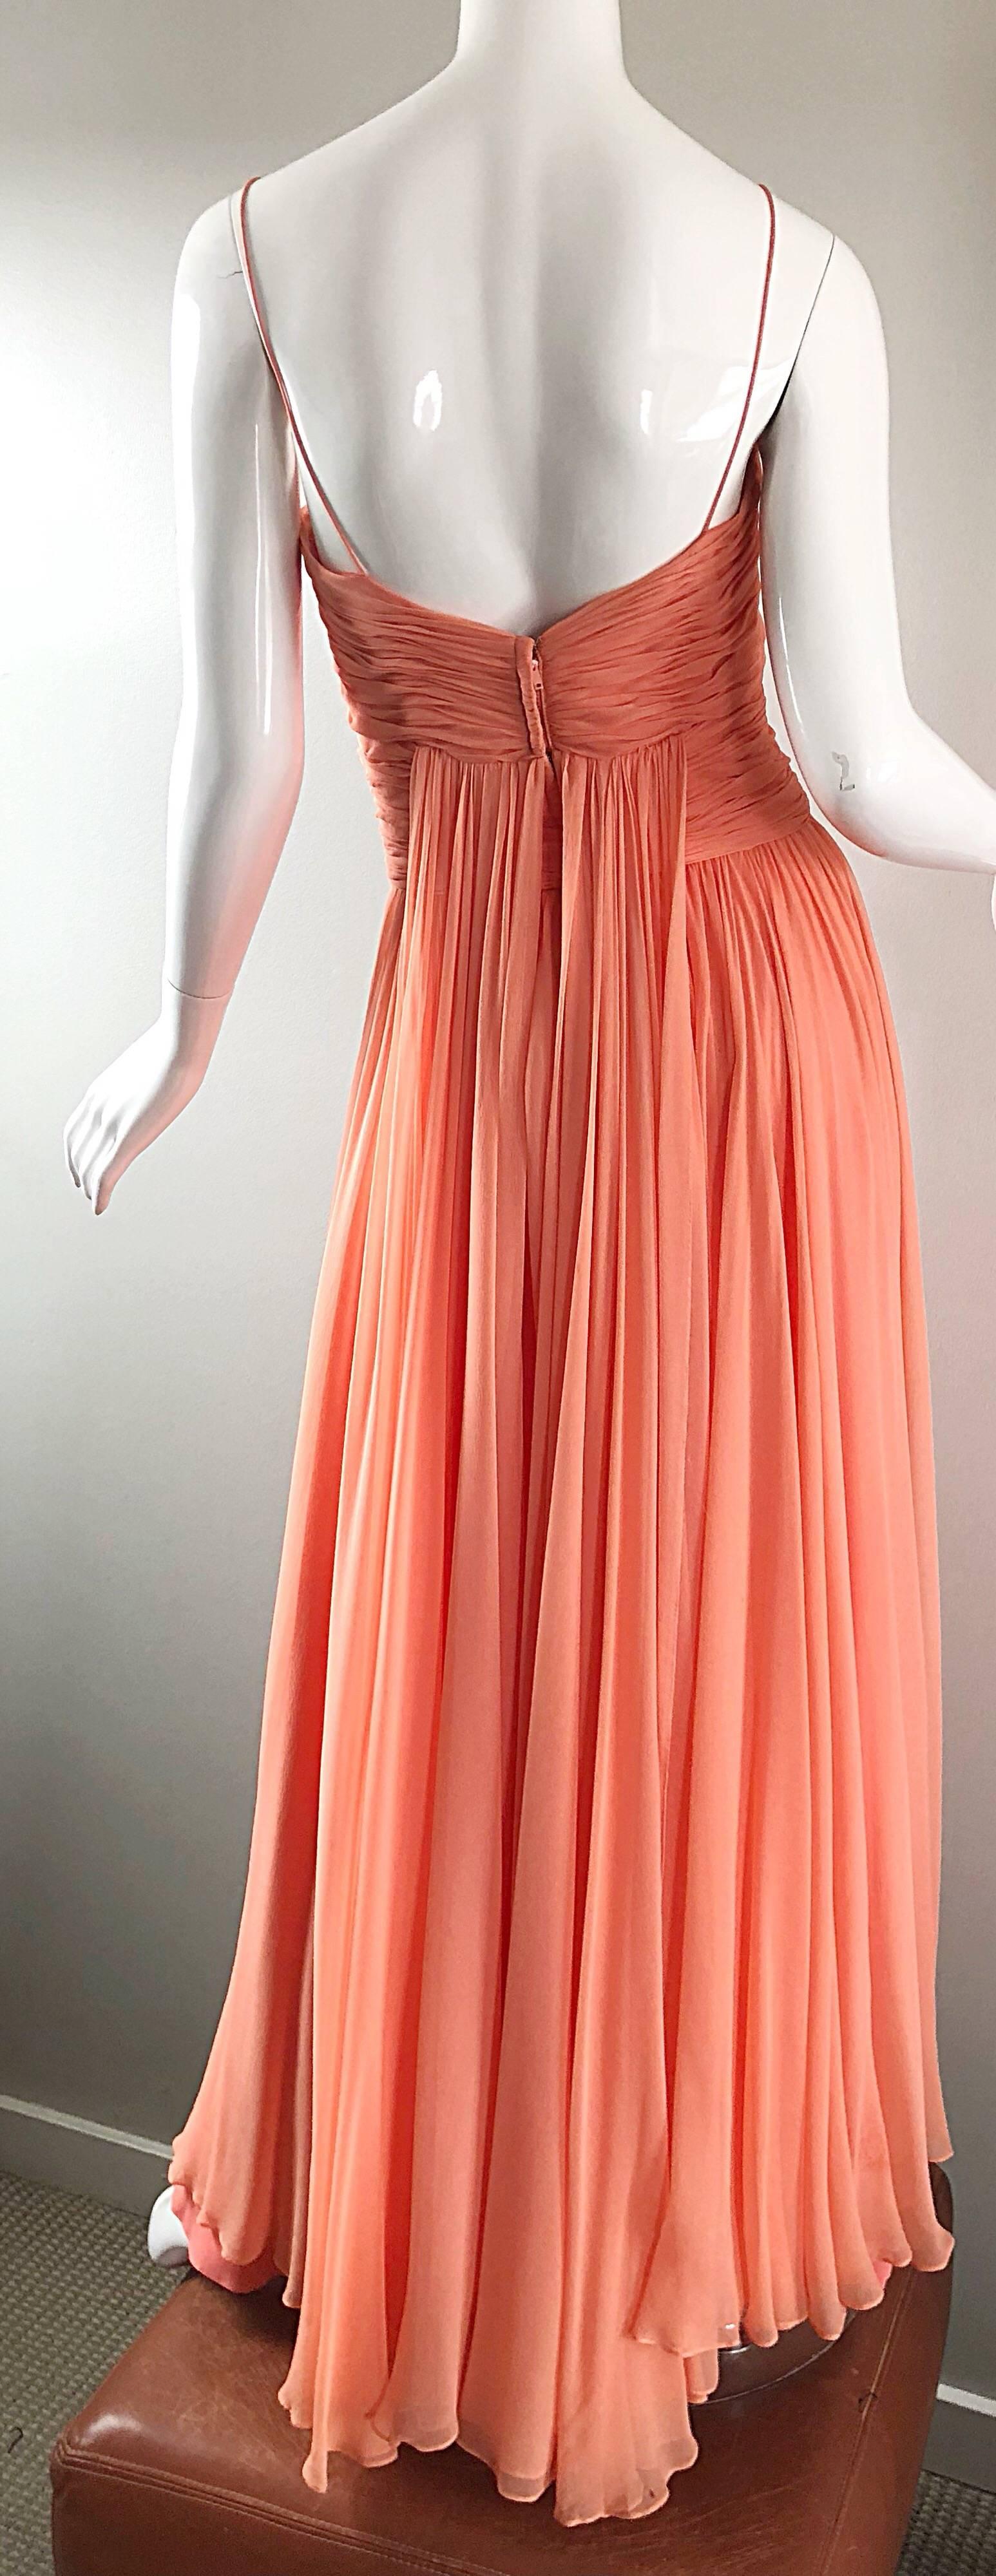 Gorgeous 1950s Saks 5th Ave. Salmon / Coral Pink Silk Chiffon Vintage 50s Gown 8